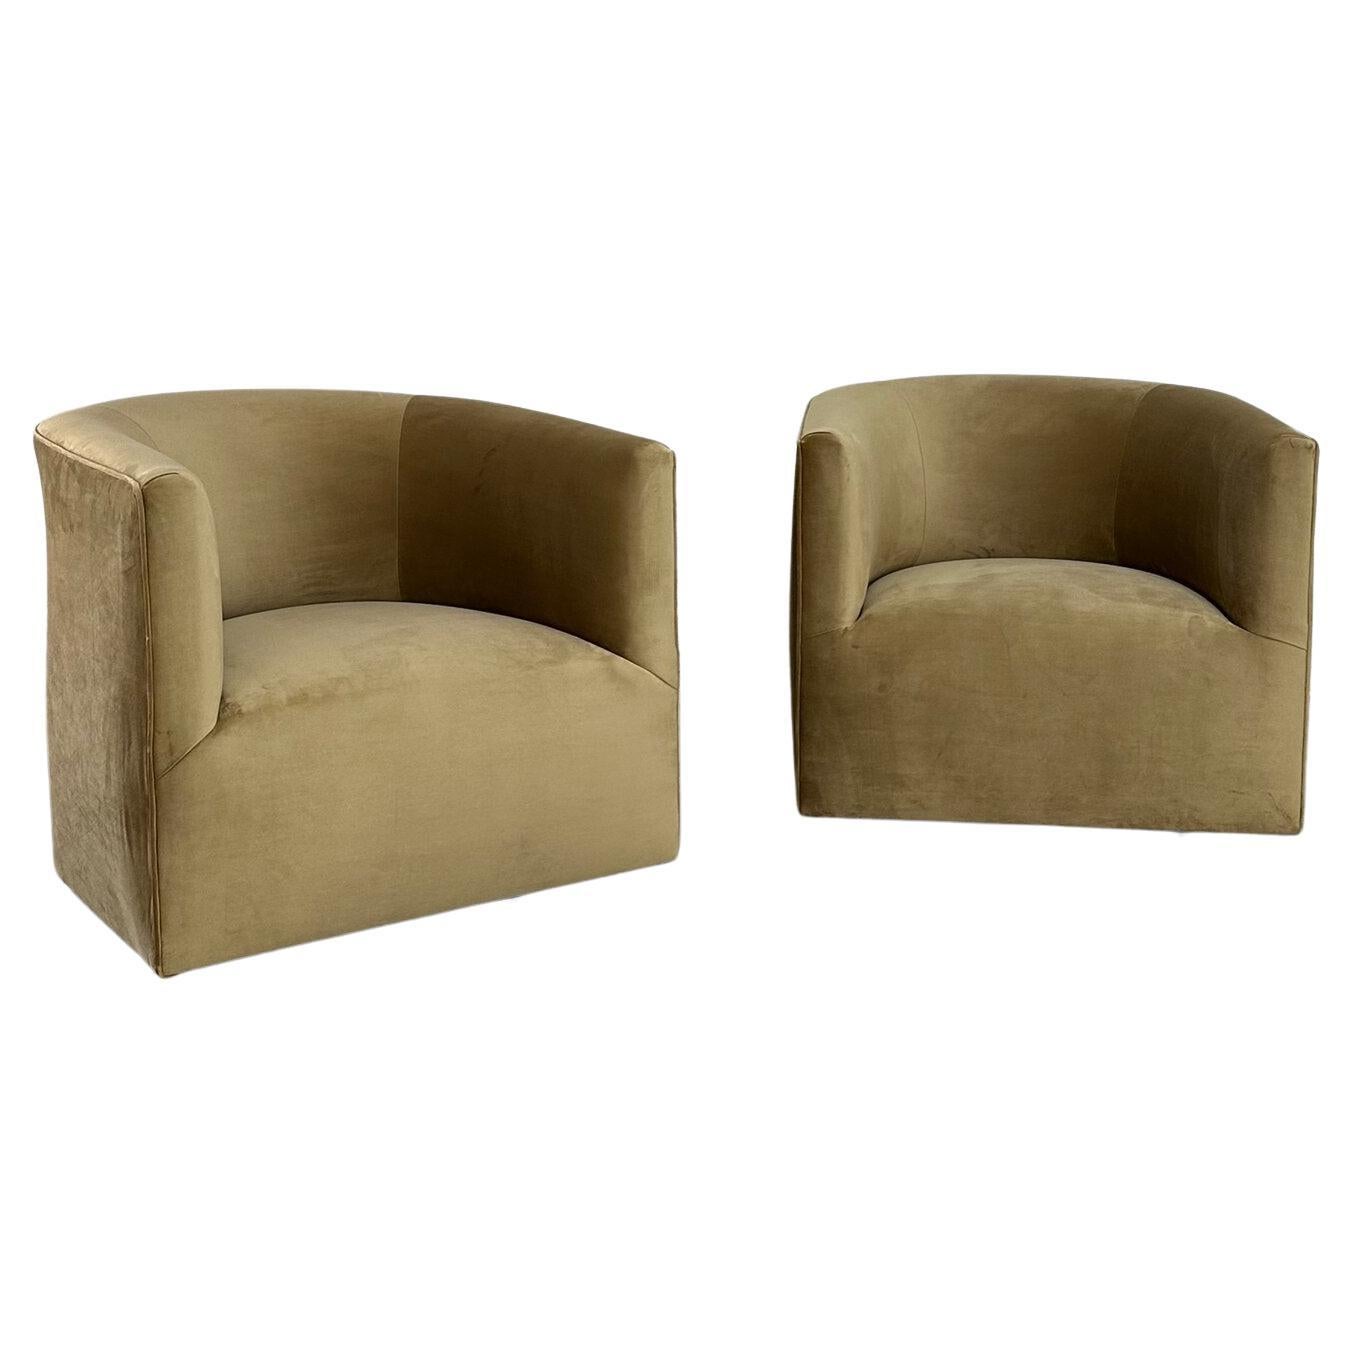 Barrel chairs on metal swivel plinths- sold separately For Sale